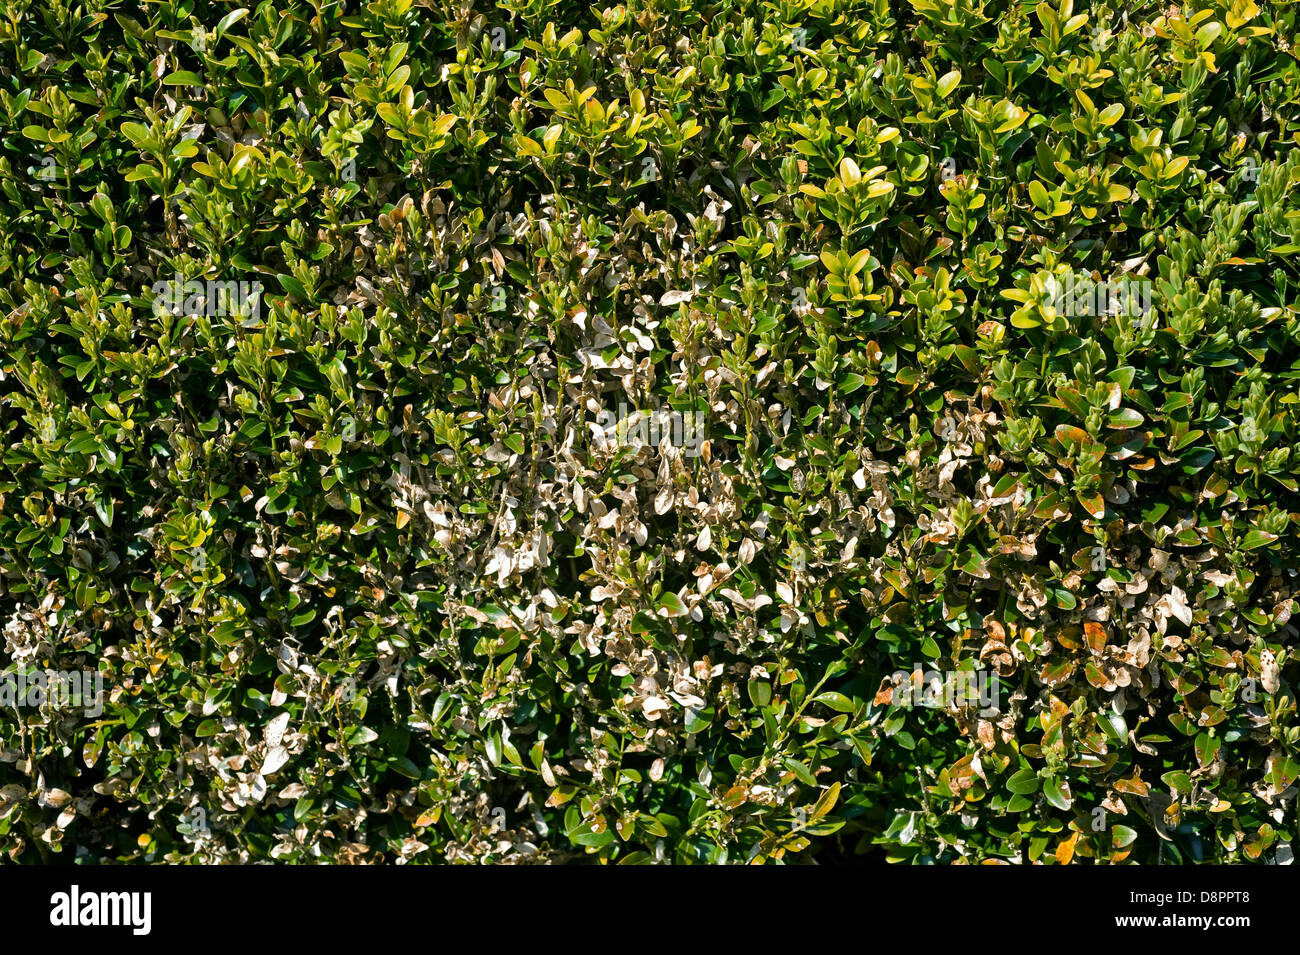 Box blight, Cylindrocladiumn buxicola, damage to Buxus sempervirens parterre hedge Stock Photo